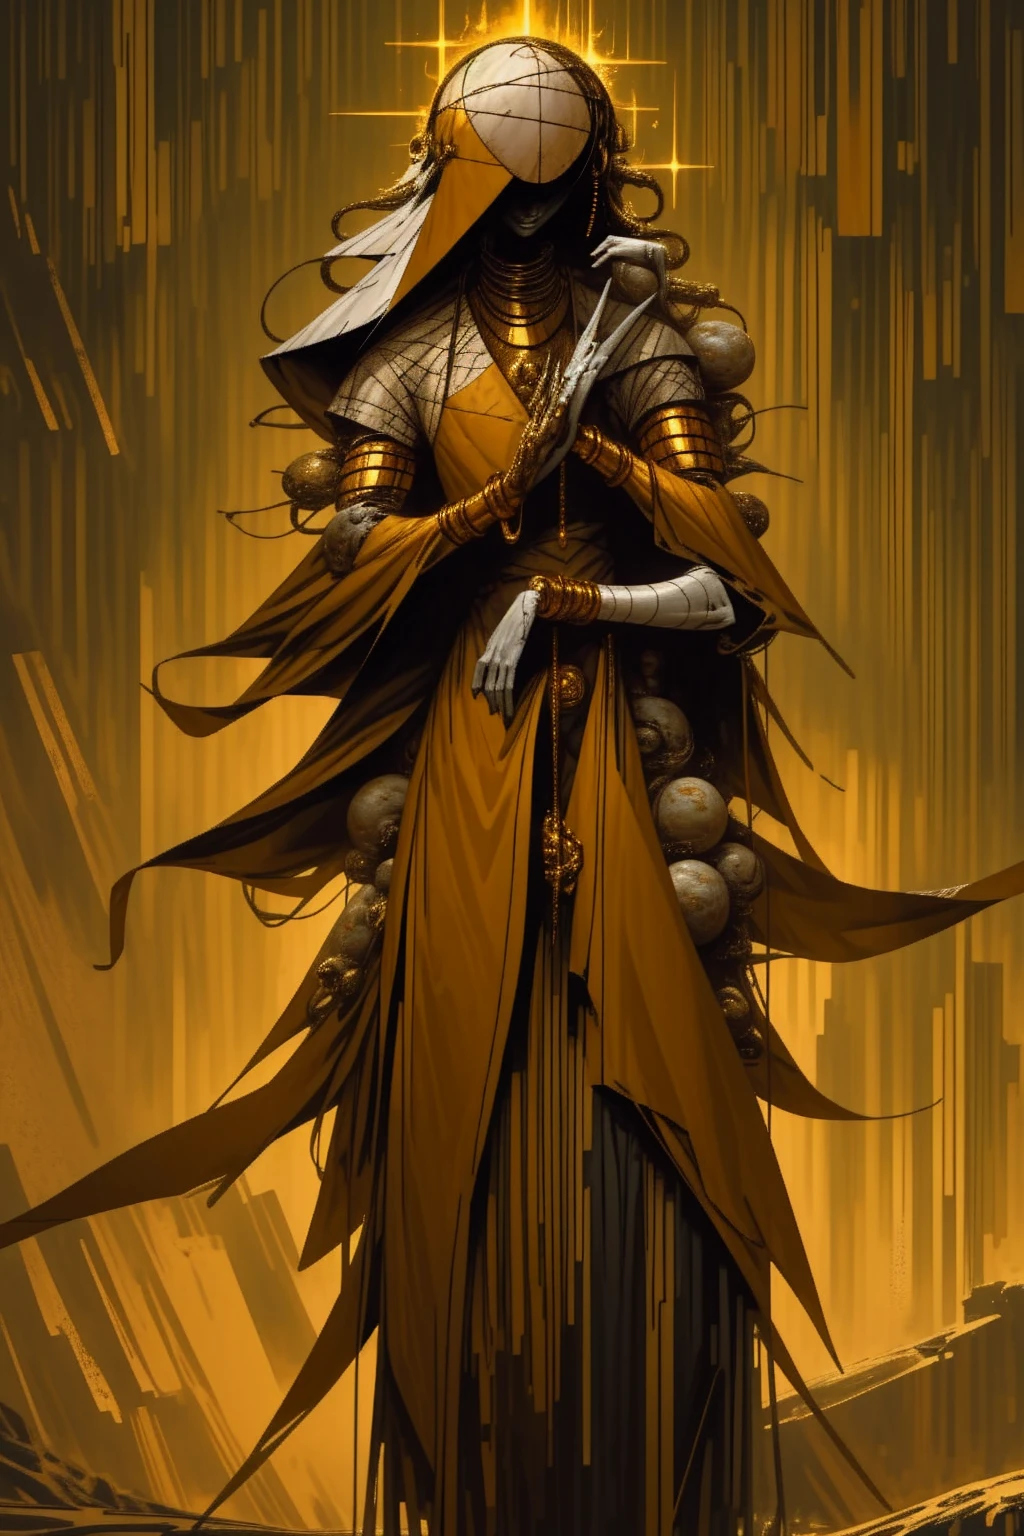 a tall menacing figure, wide shoulders, frail body, gaunt, body is withering/decaying, covered head to toe in a tattered yellow cloak, yellow cloak covering whole body except forearms, tattered yellow hood over the head, scrappy yellow veil covering entire face, face completely (concealed), can't see face, old yellow stained bandage wraps loosely cover arms, many golden bangles all over both forearms, covered in golden jewelry, old decrepit hands, hands hovering just over the naval, hands are steepling together, a giant golden sunset behind them,